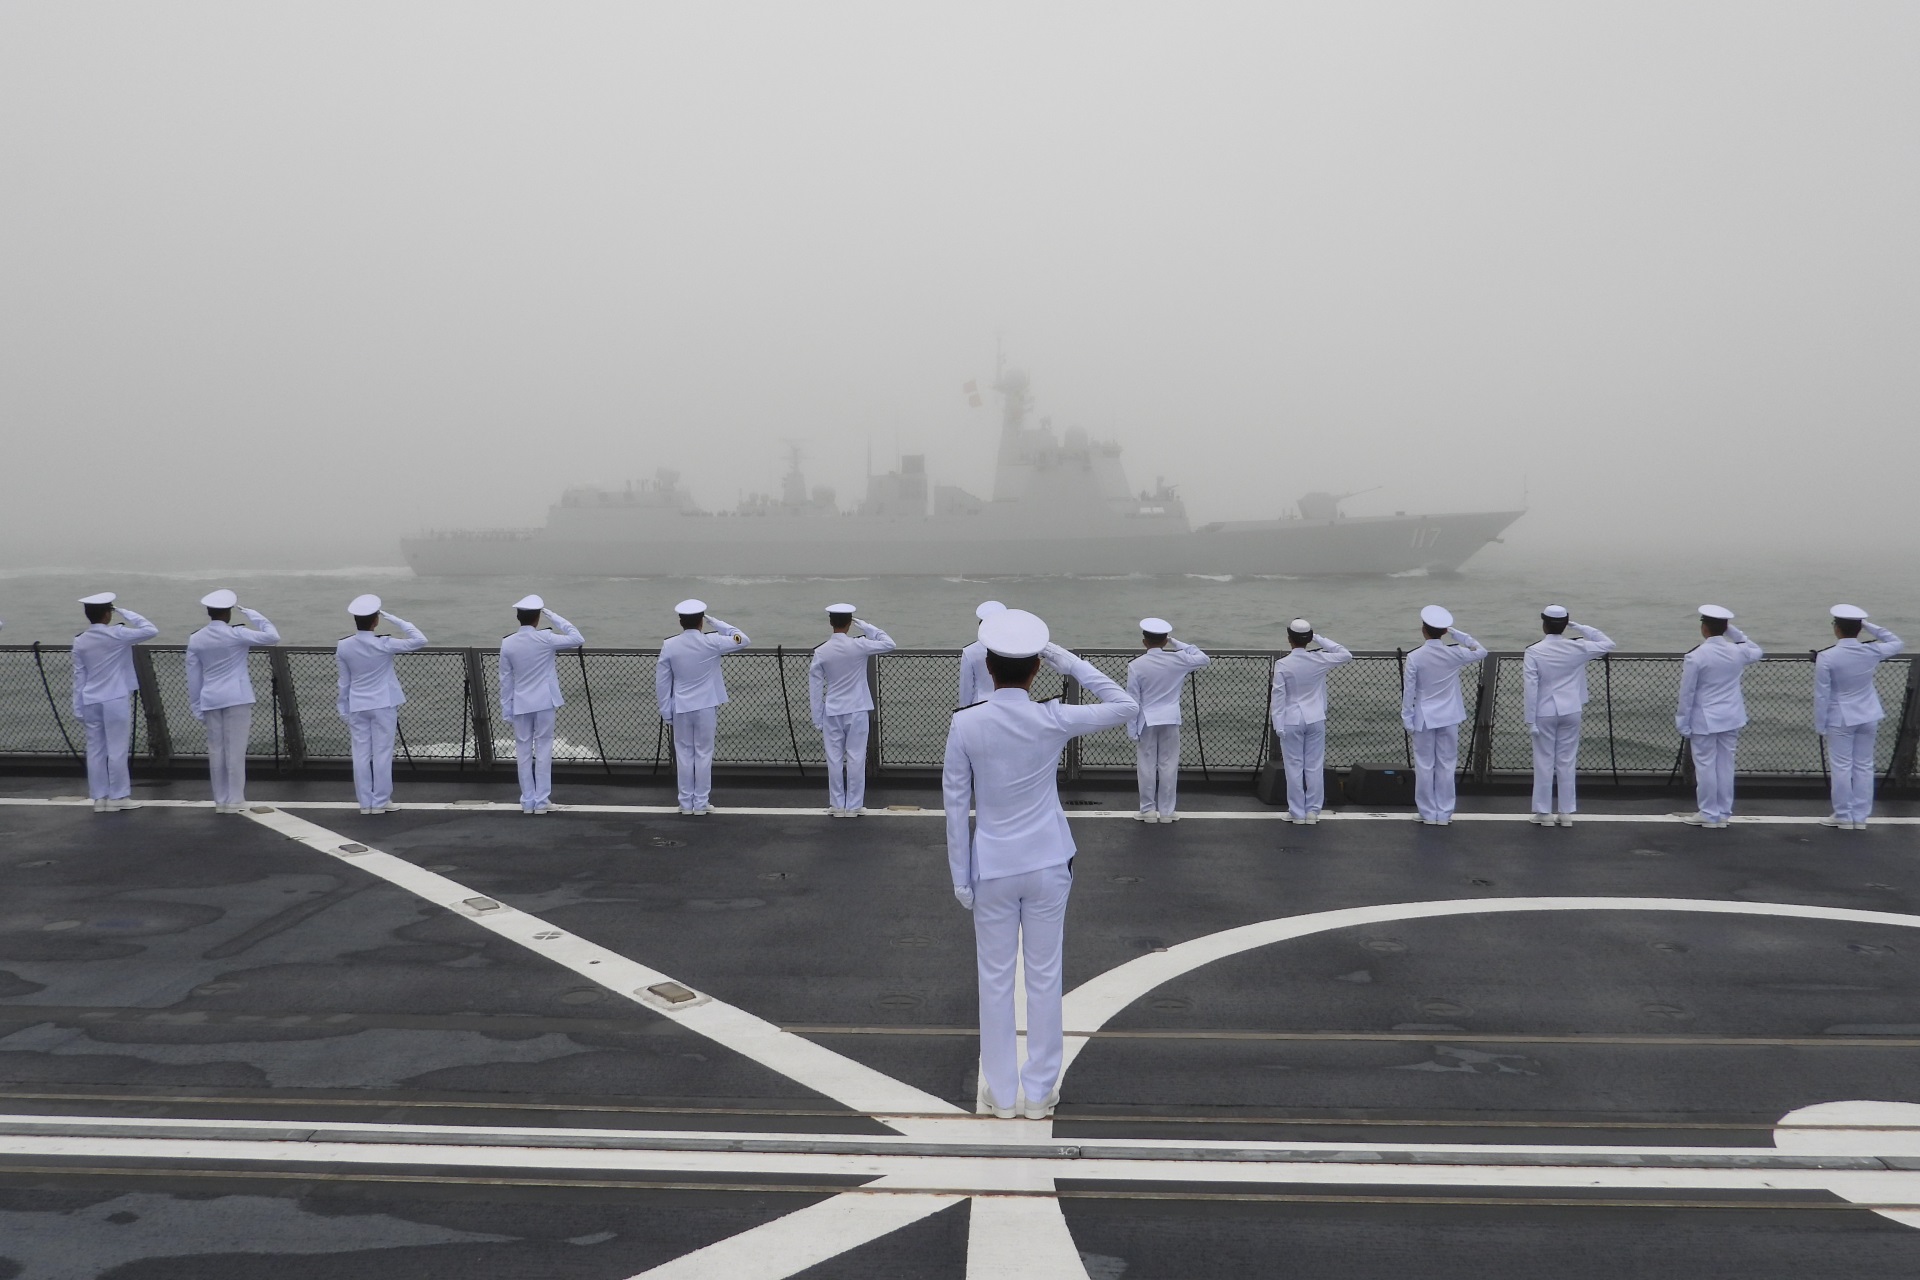 Crew of RSN’s Formidable-class Frigate RSS Stalwart saluting President of the People's Republic of China Xi Jinping as he reviews ships participating in the International Fleet Review on the People Liberation Army Navy's PLANS Xining.